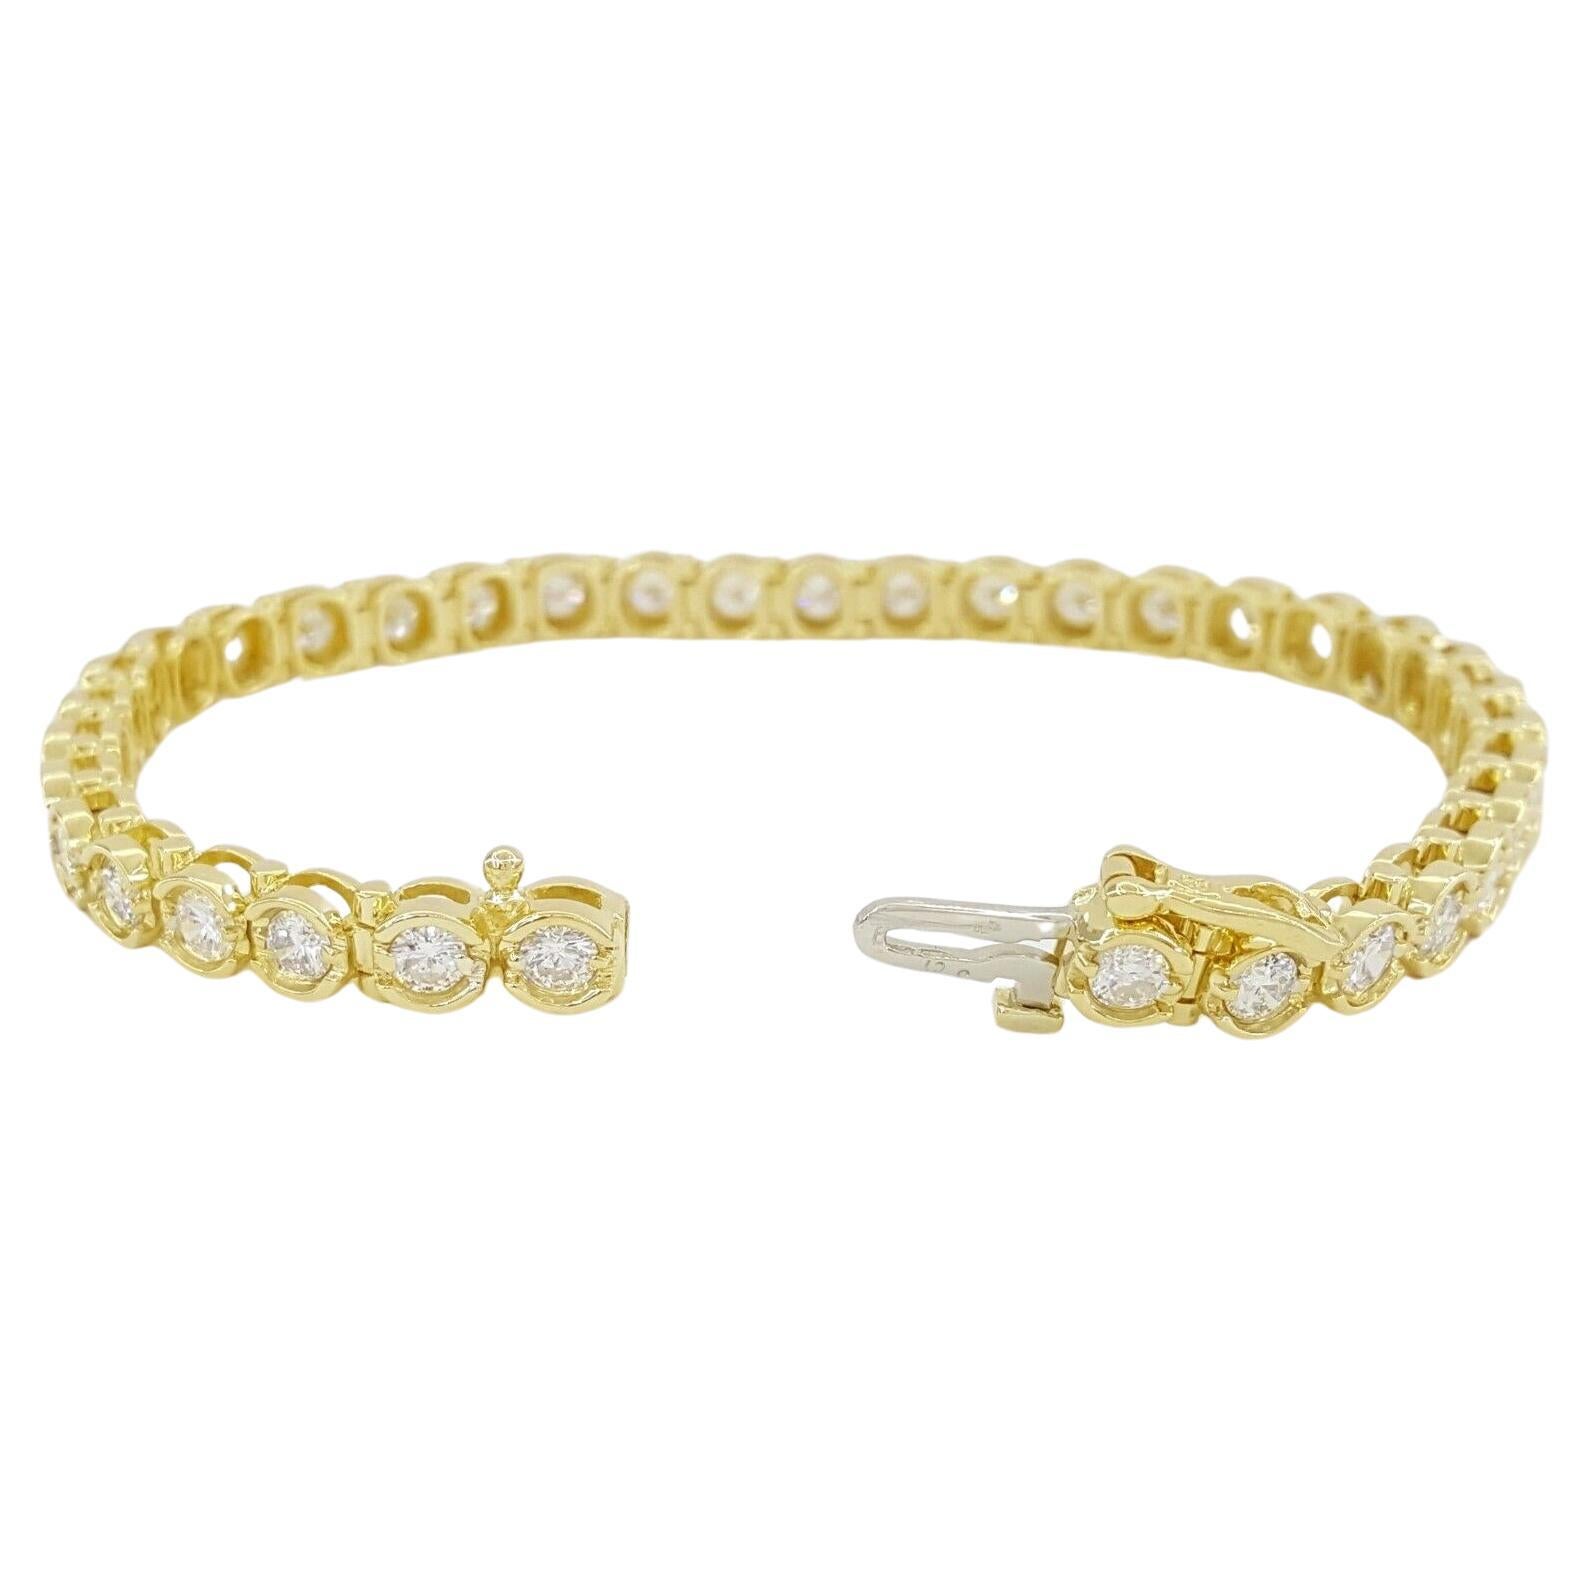 5.70 Carat Round Brilliant Cut Diamonds 18 Carat Yellow Gold Tennis Bracelet In New Condition For Sale In Rome, IT